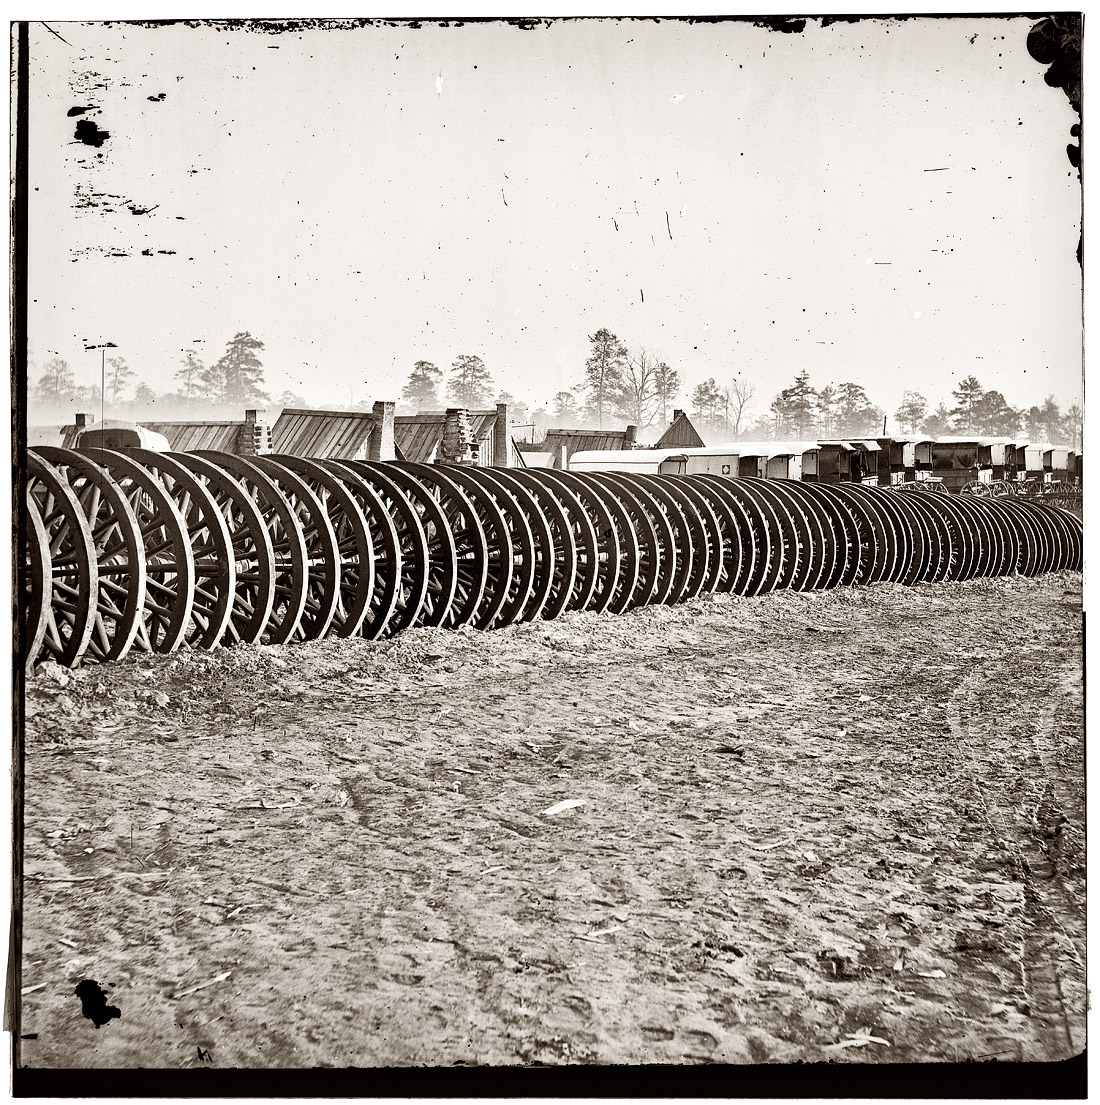 Park of Army wagon wheels at City Point, Virginia, in 1865. View full size. Wet collodion glass plate stereograph; photographer unknown.